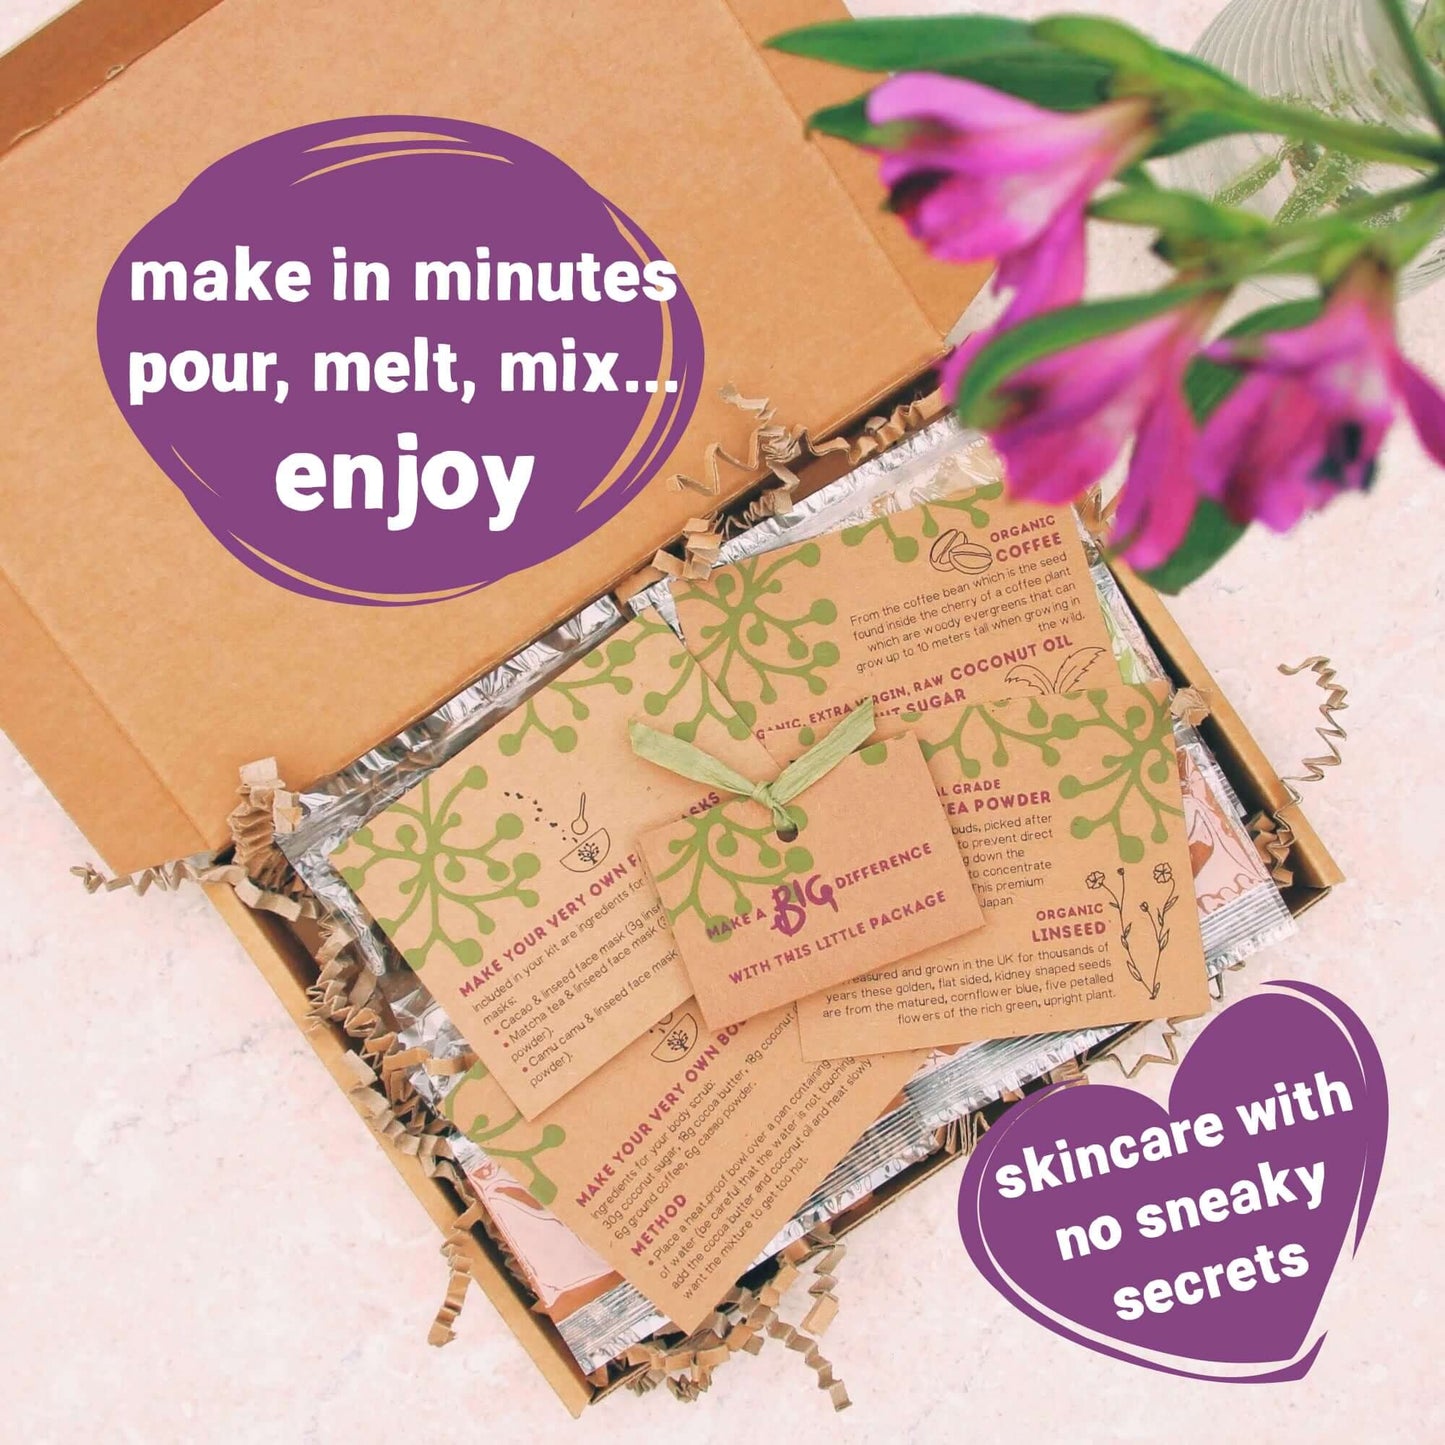 make skincare with no sneaky secrets inside pamper kit letterbox gift